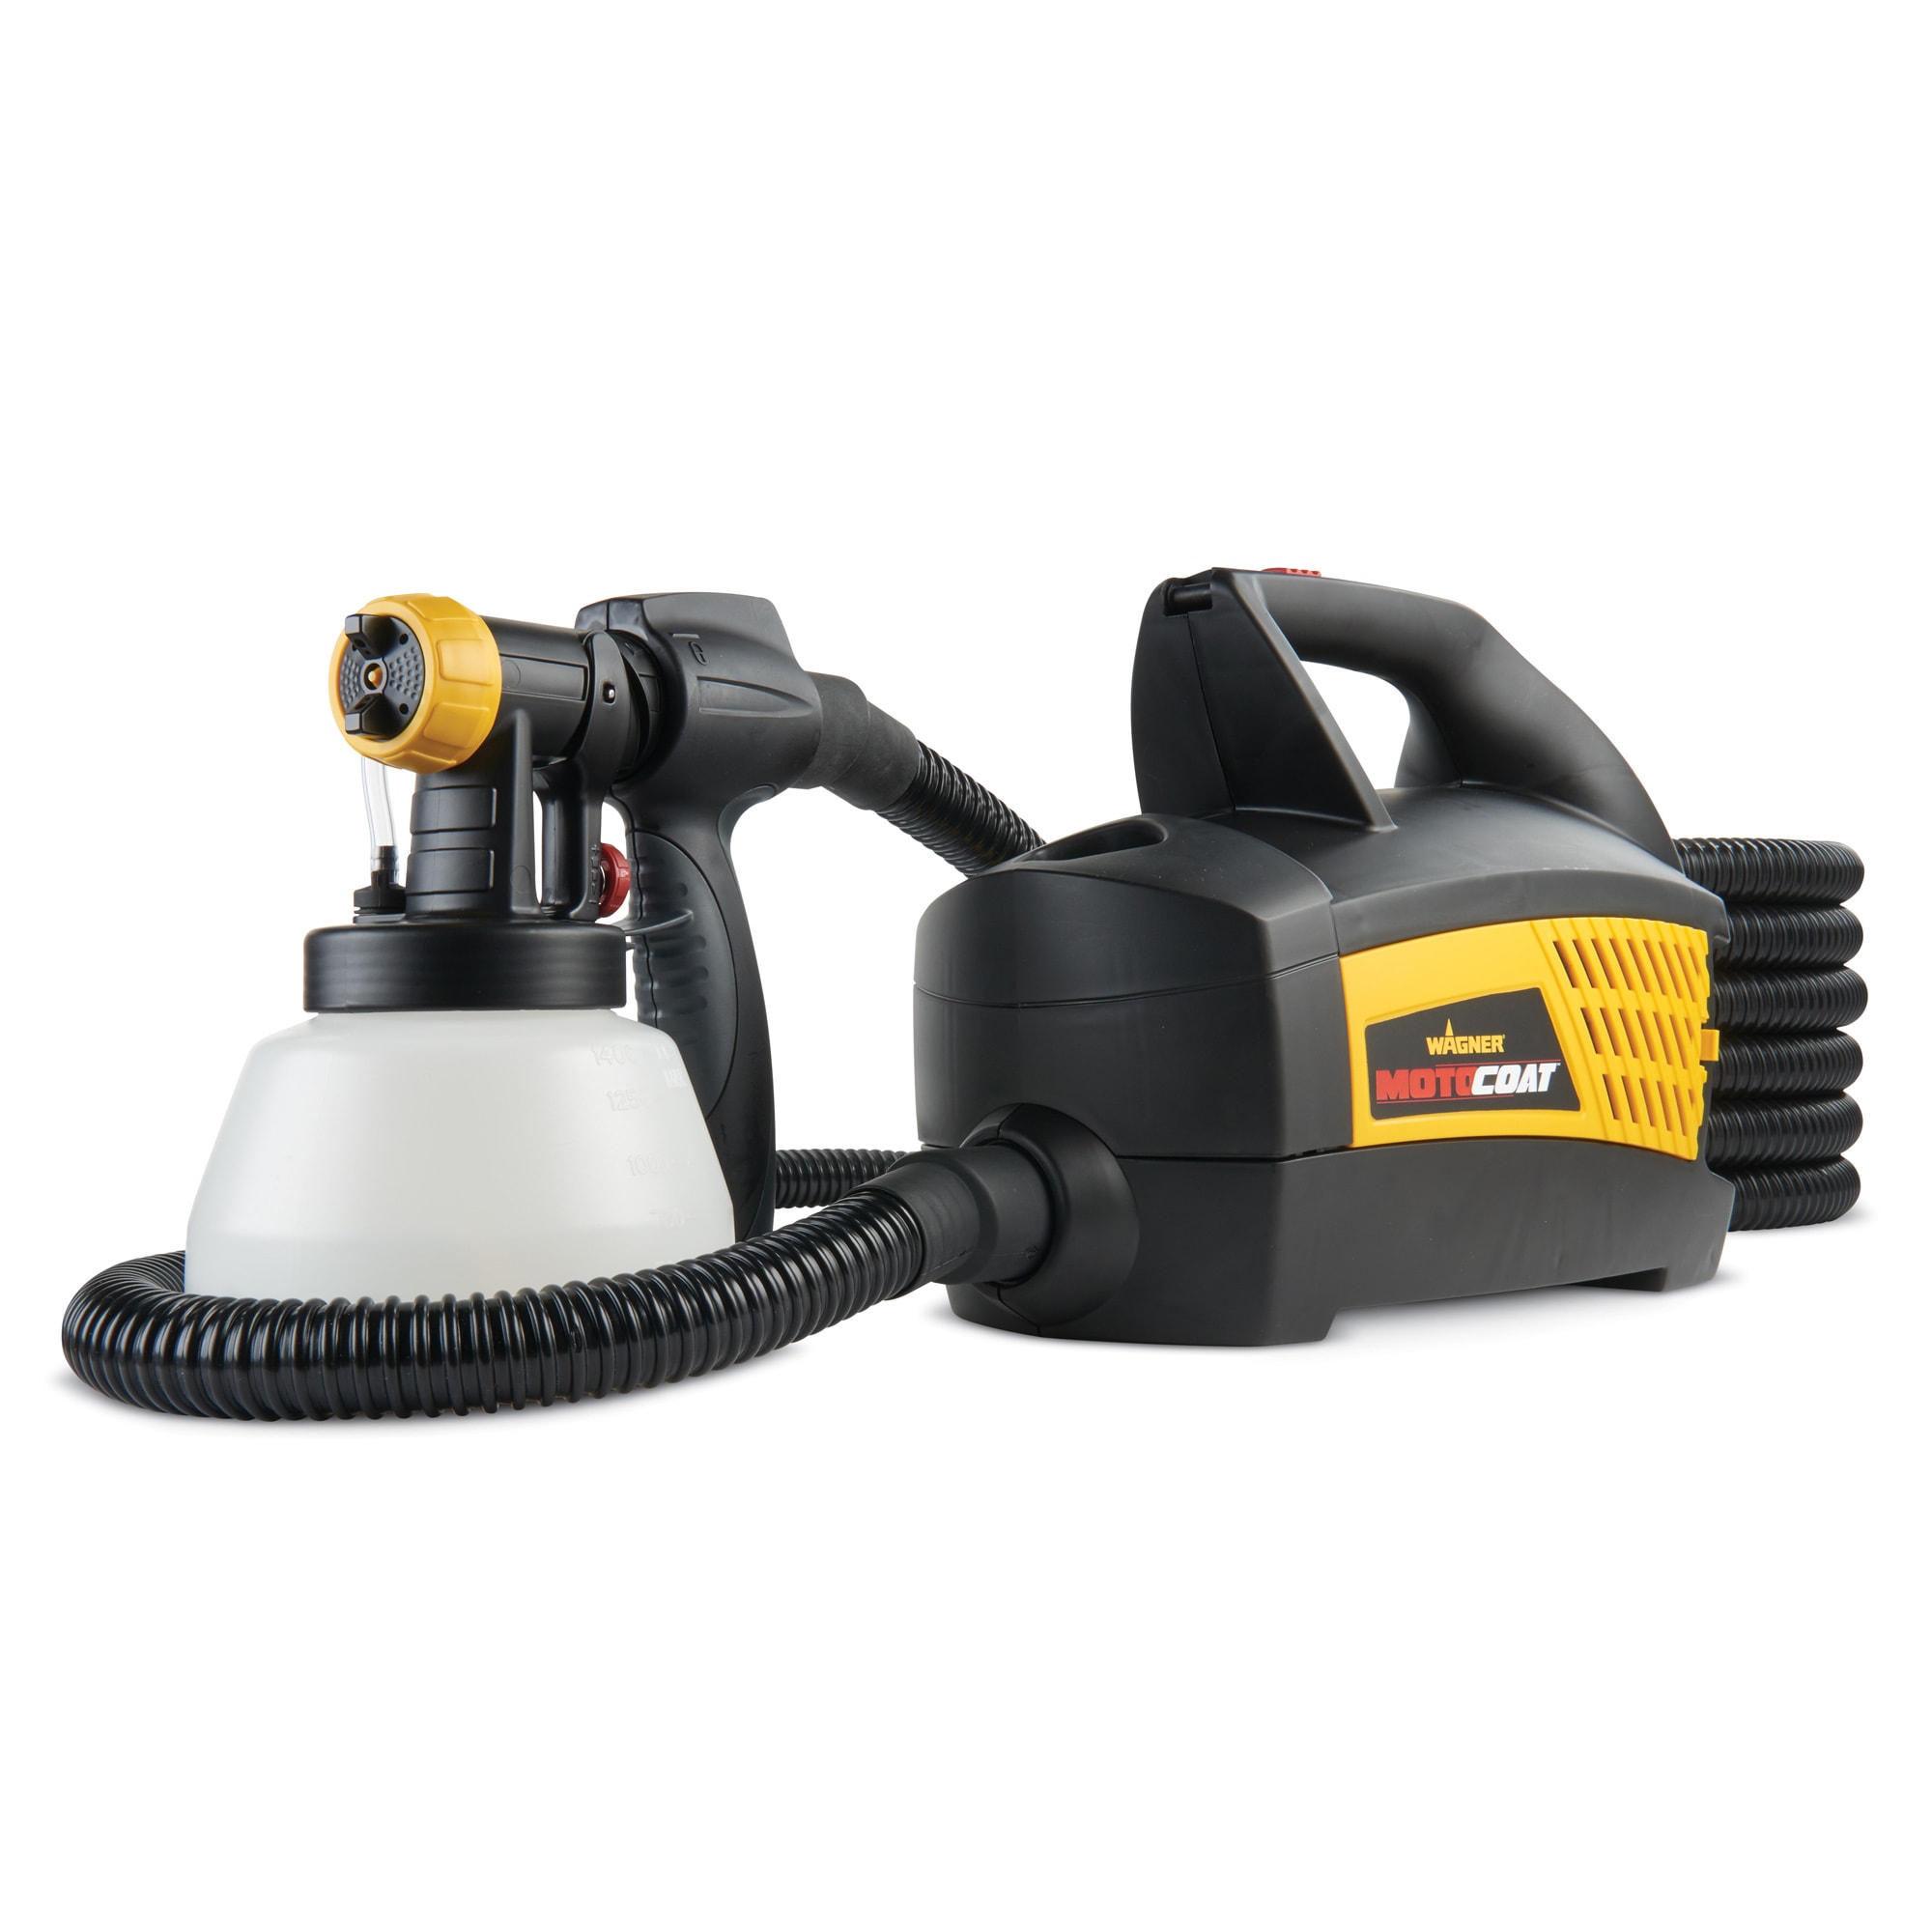 Wagner Motocoat Complete Corded Electric Stationary HVLP Paint Sprayer at